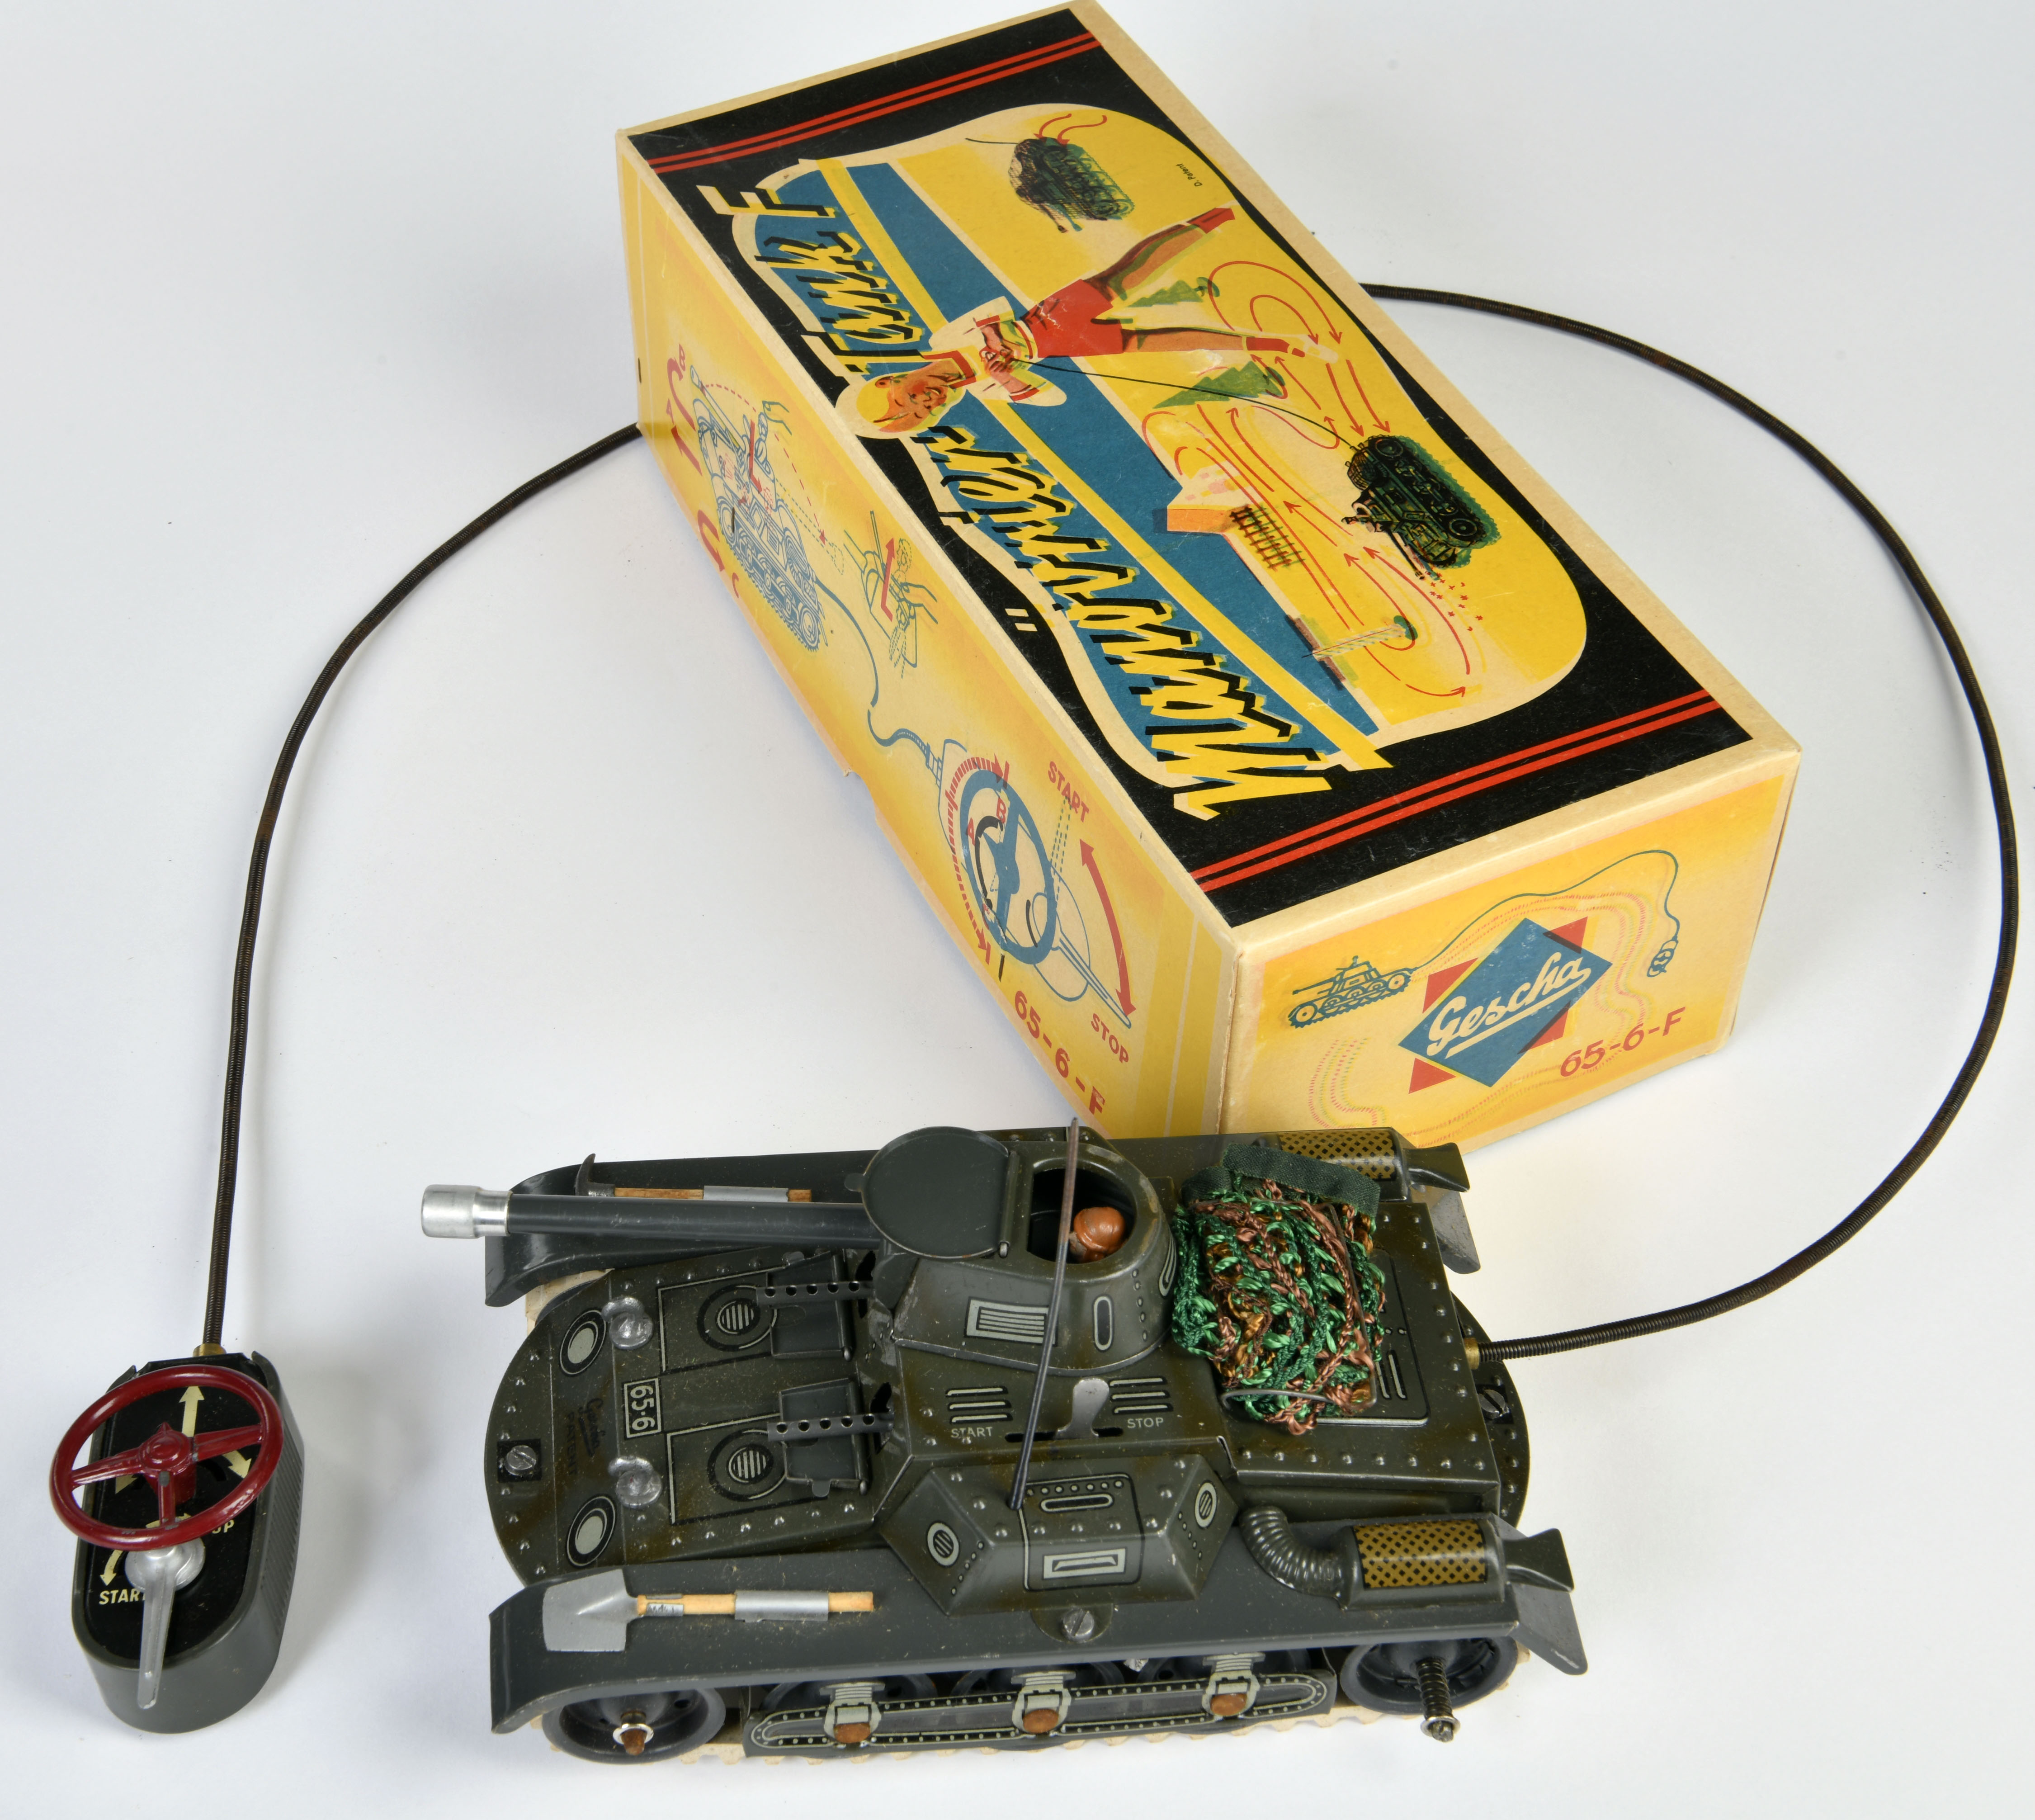 Gescha, Manoeuvre Tank with remote control, W.-Germany, 20 cm, tin, function ok, box C 1, C 1- - Image 4 of 4